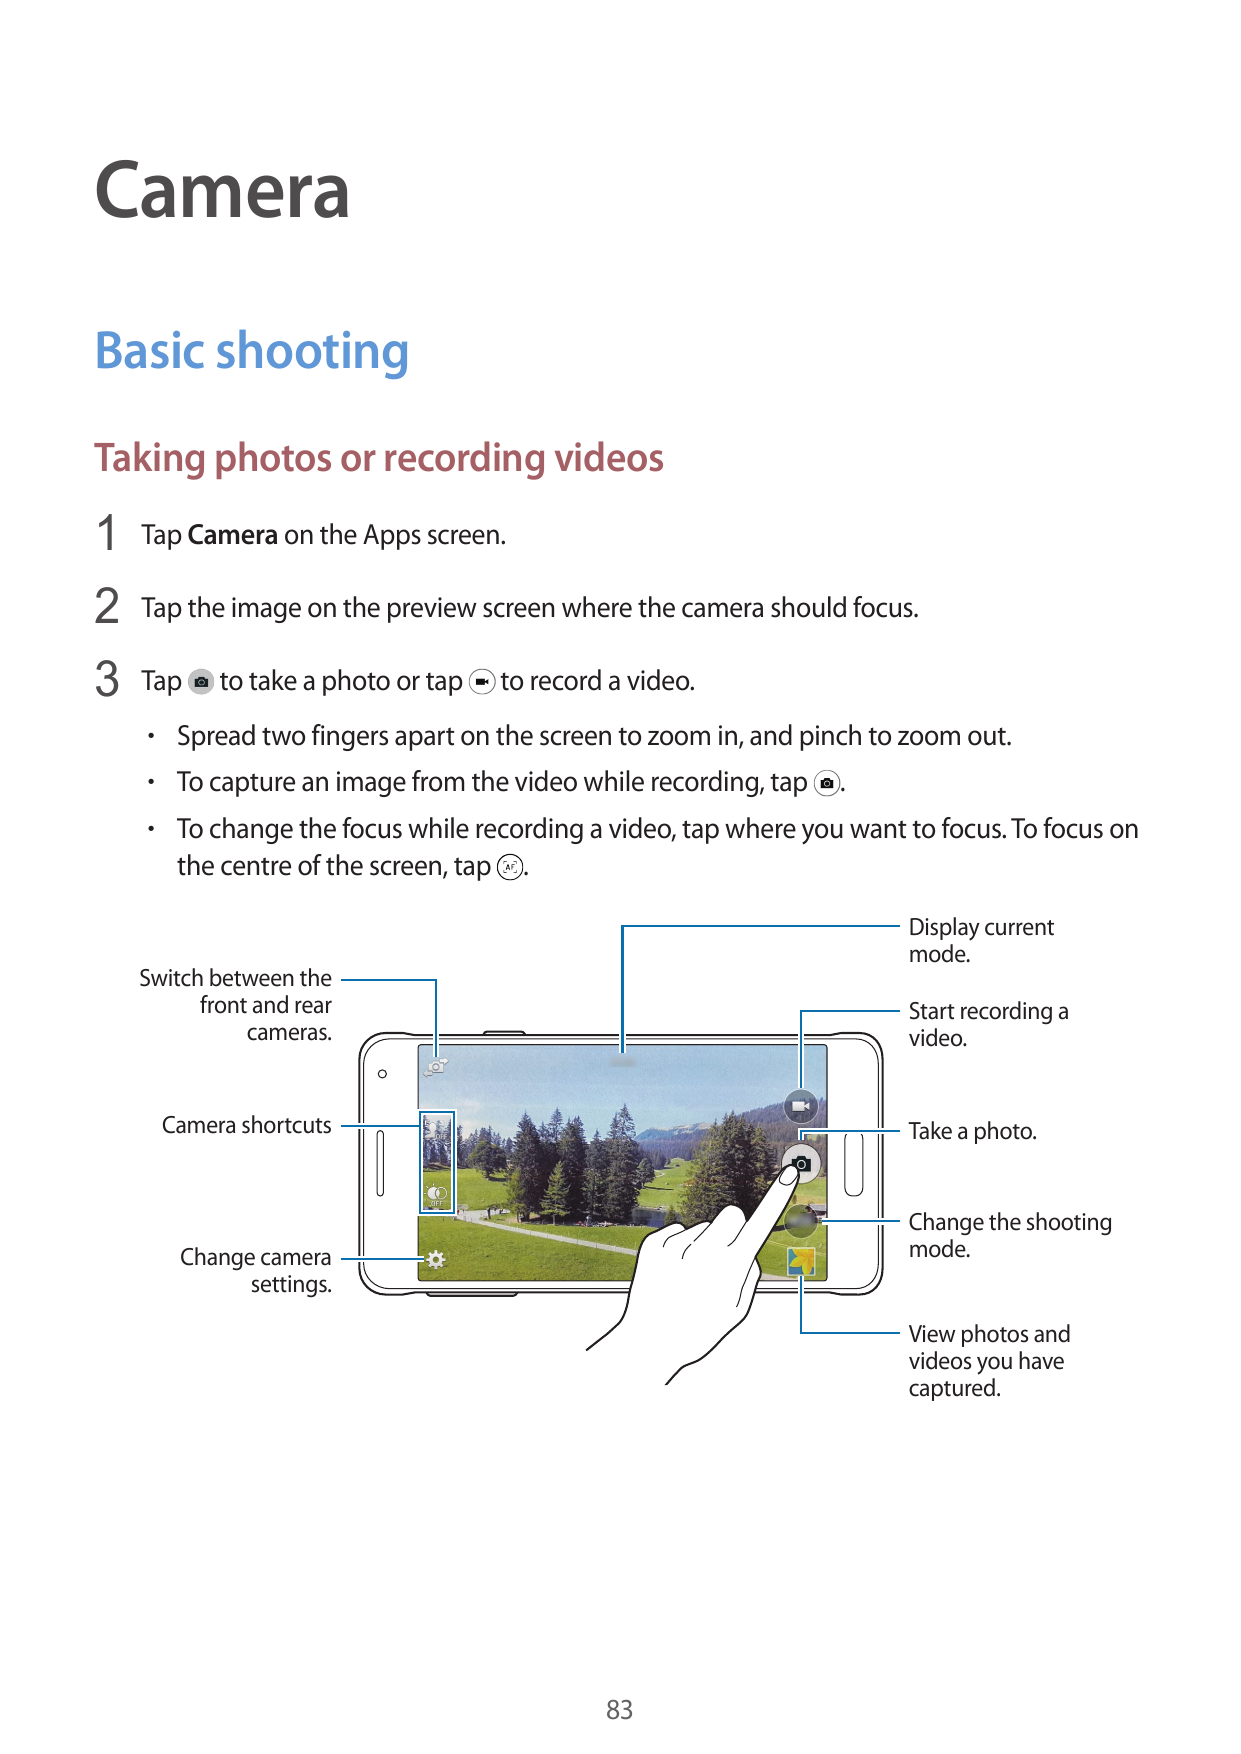 CameraBasic shootingTaking photos or recording videos1 Tap Camera on the Apps screen.2 Tap the image on the preview screen where